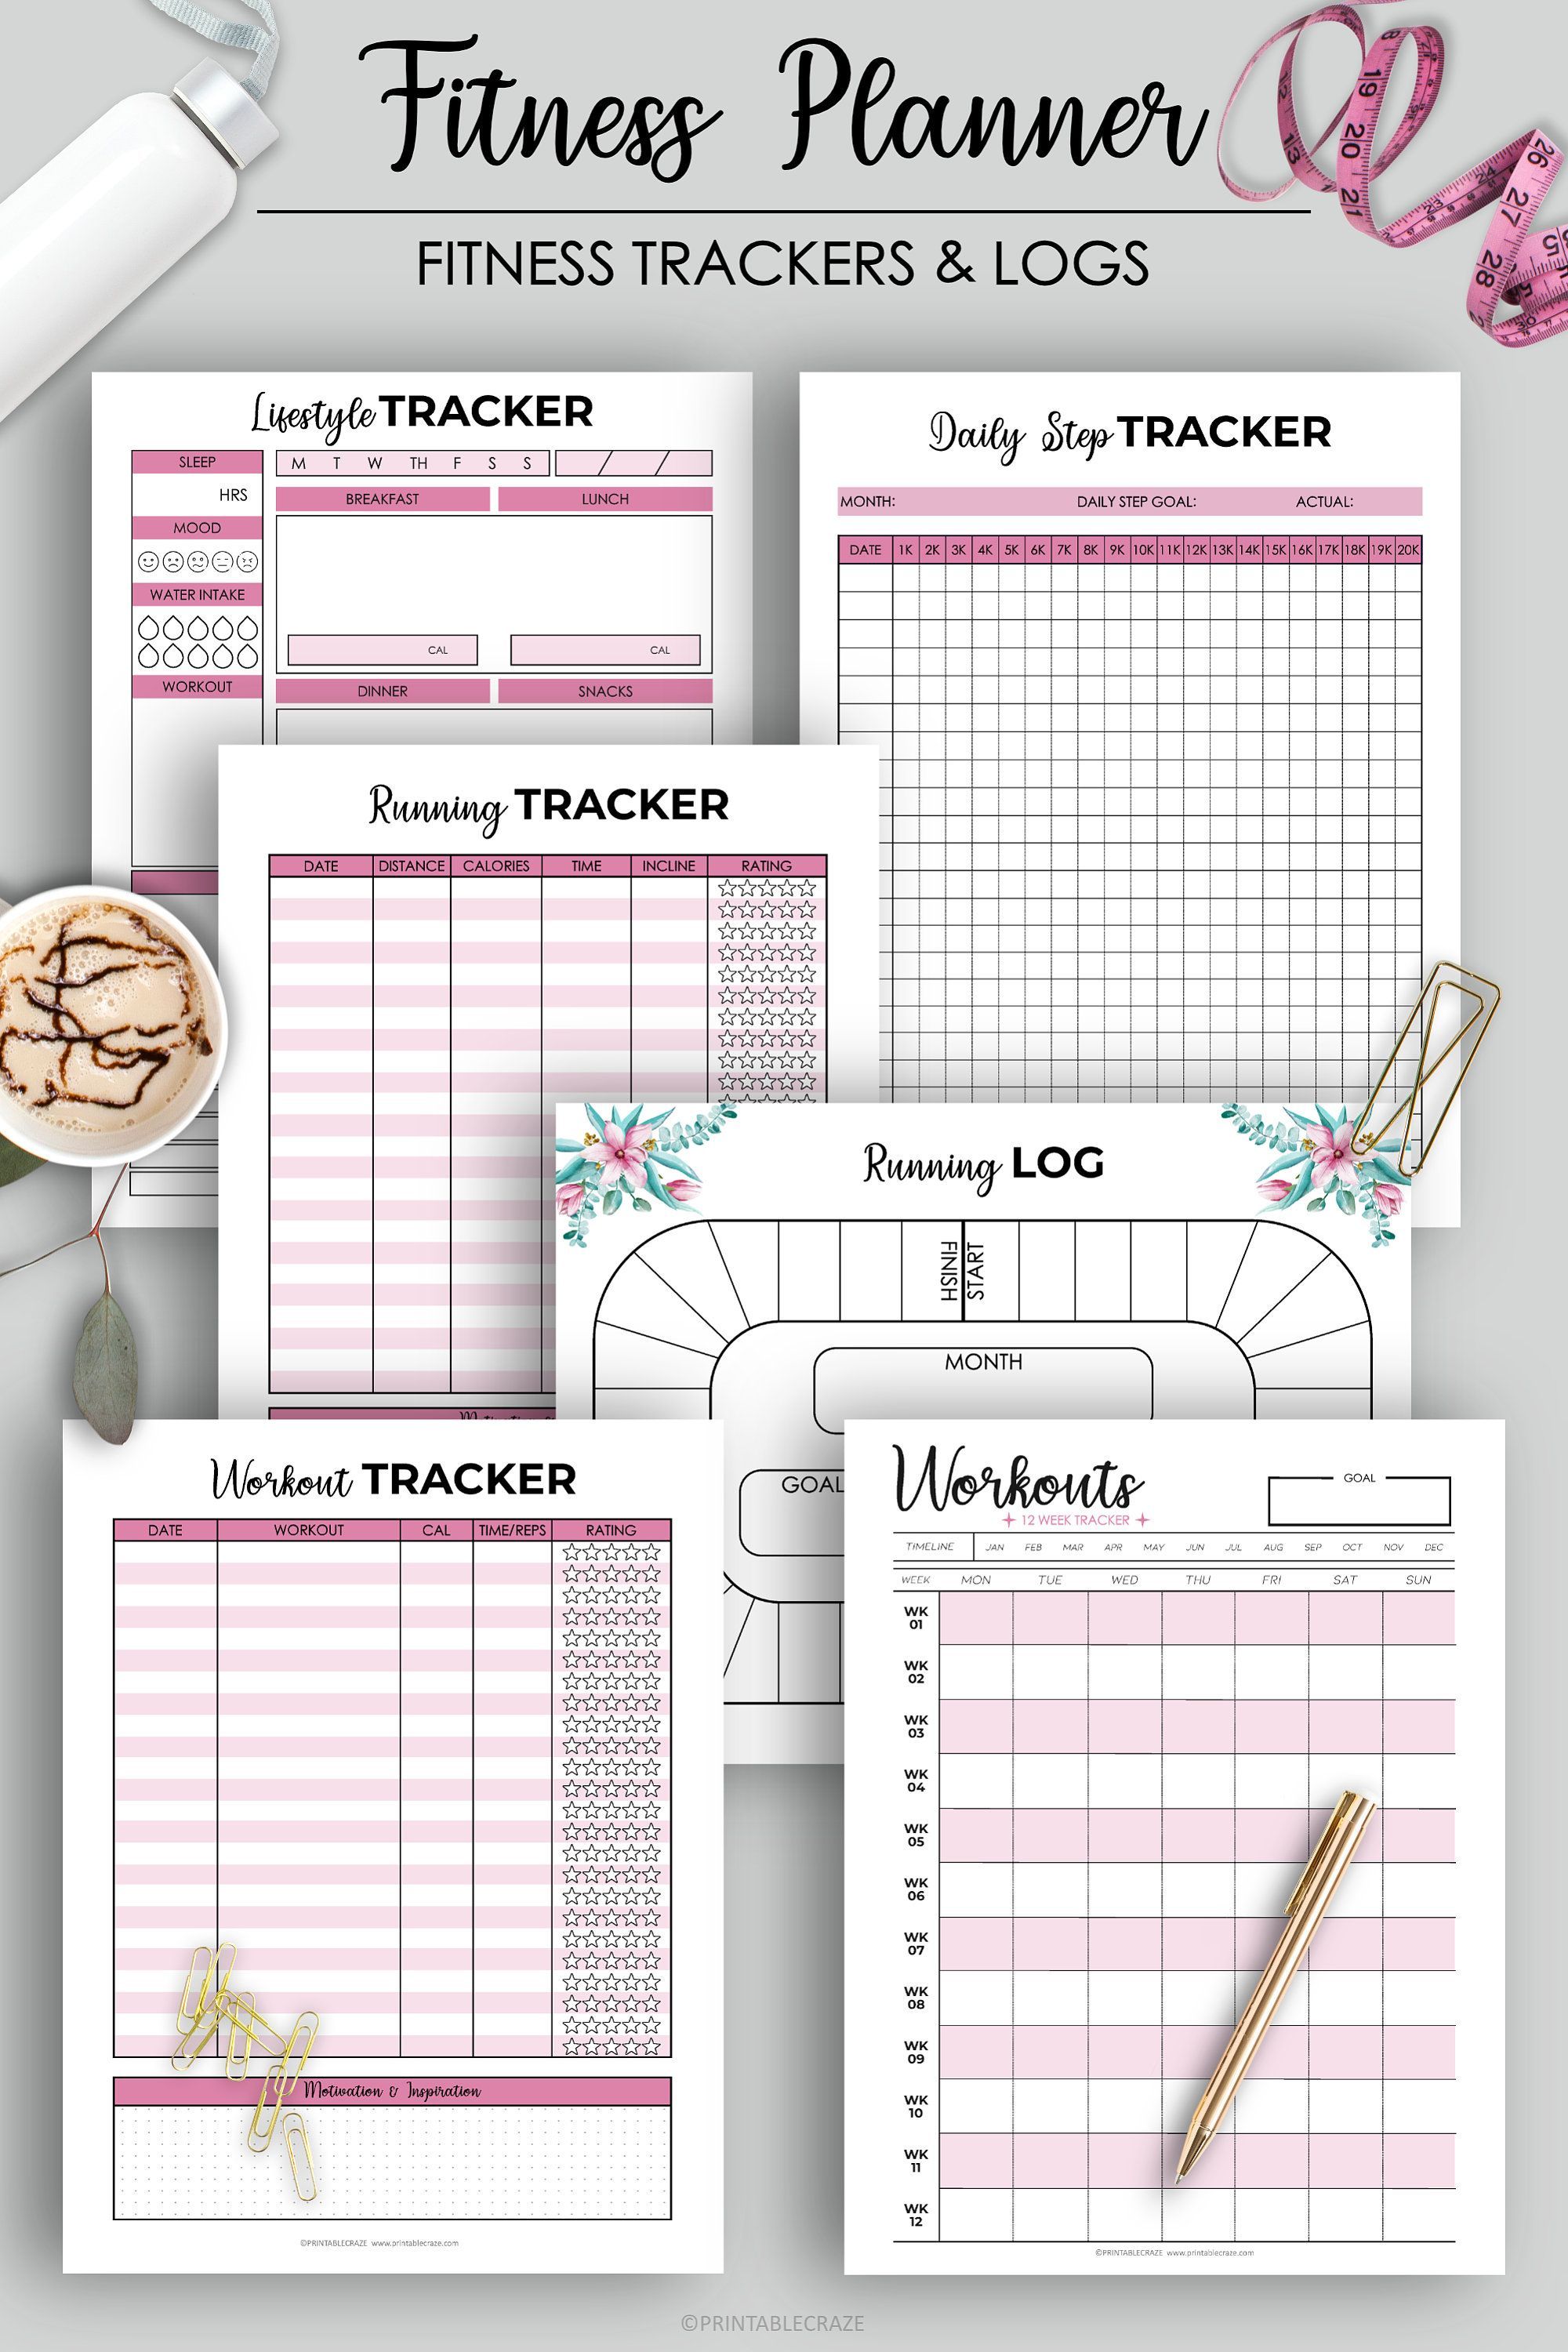 Fitness Planner Printable Weight Loss Health Planner Fitness Journal Workout Log Food Diary Calorie Tracker Daily Weight Loss Step Tracker -   18 fitness Routine planner ideas